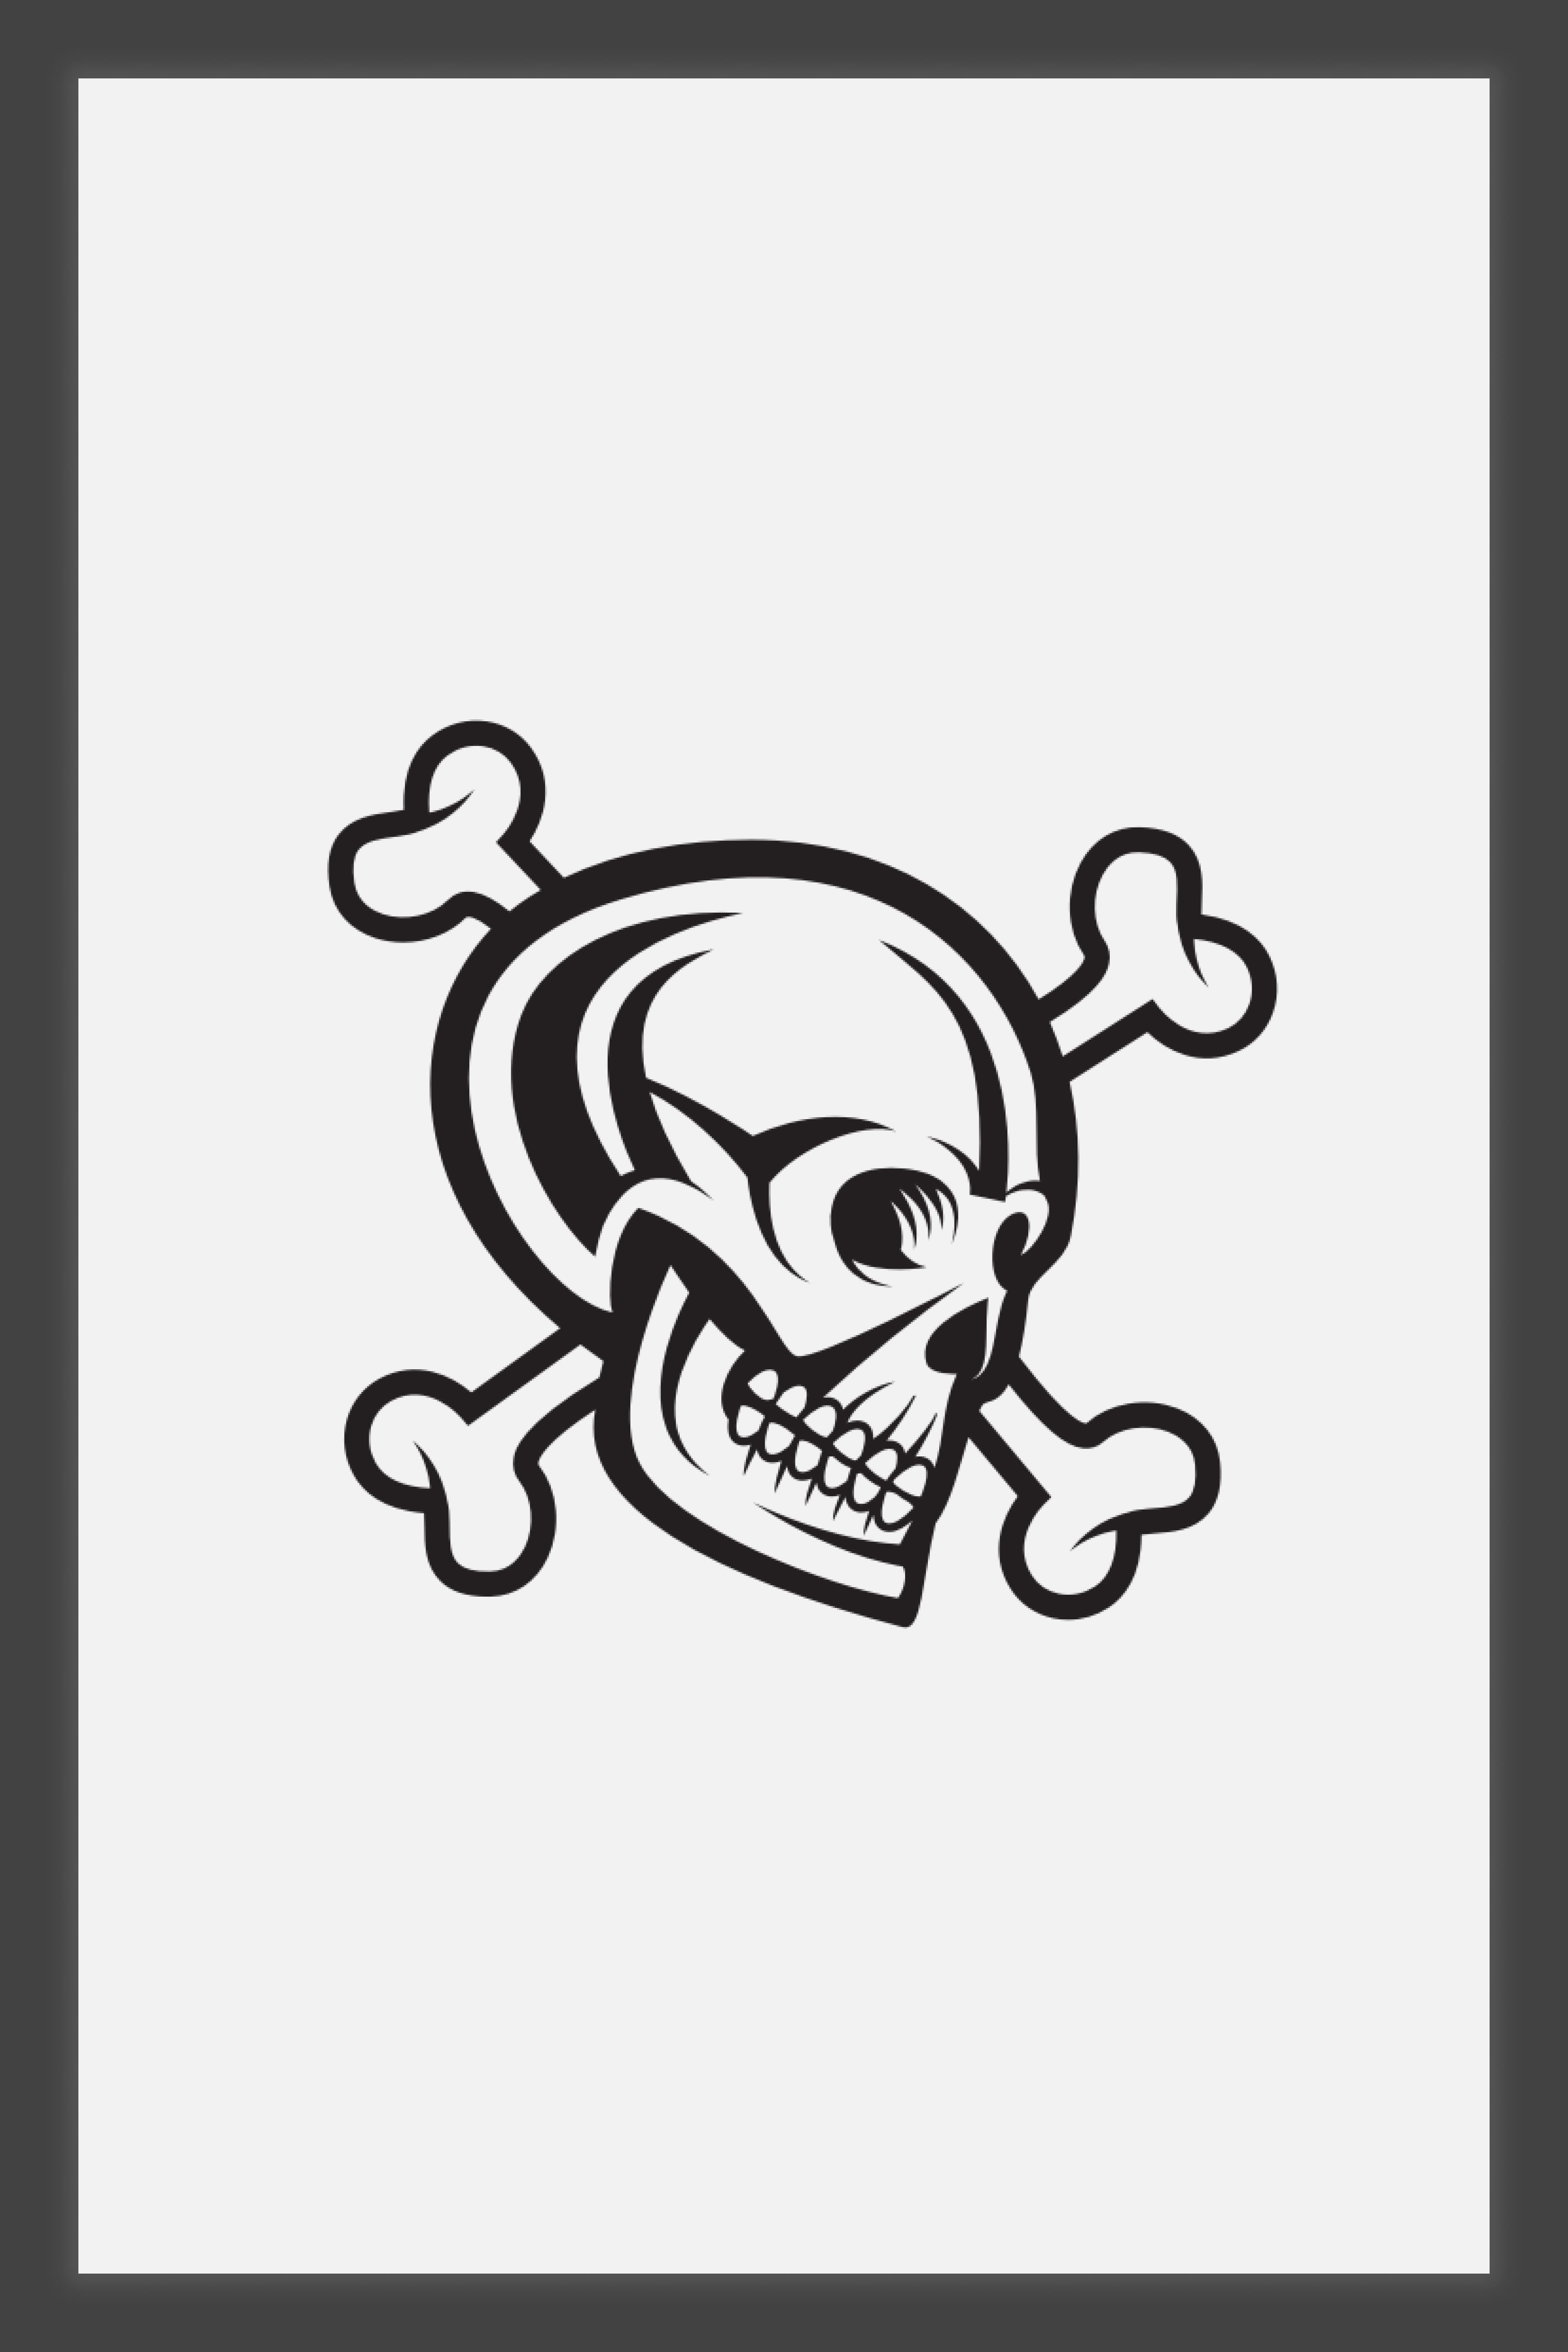 Image of a skull on a background of crossbones.